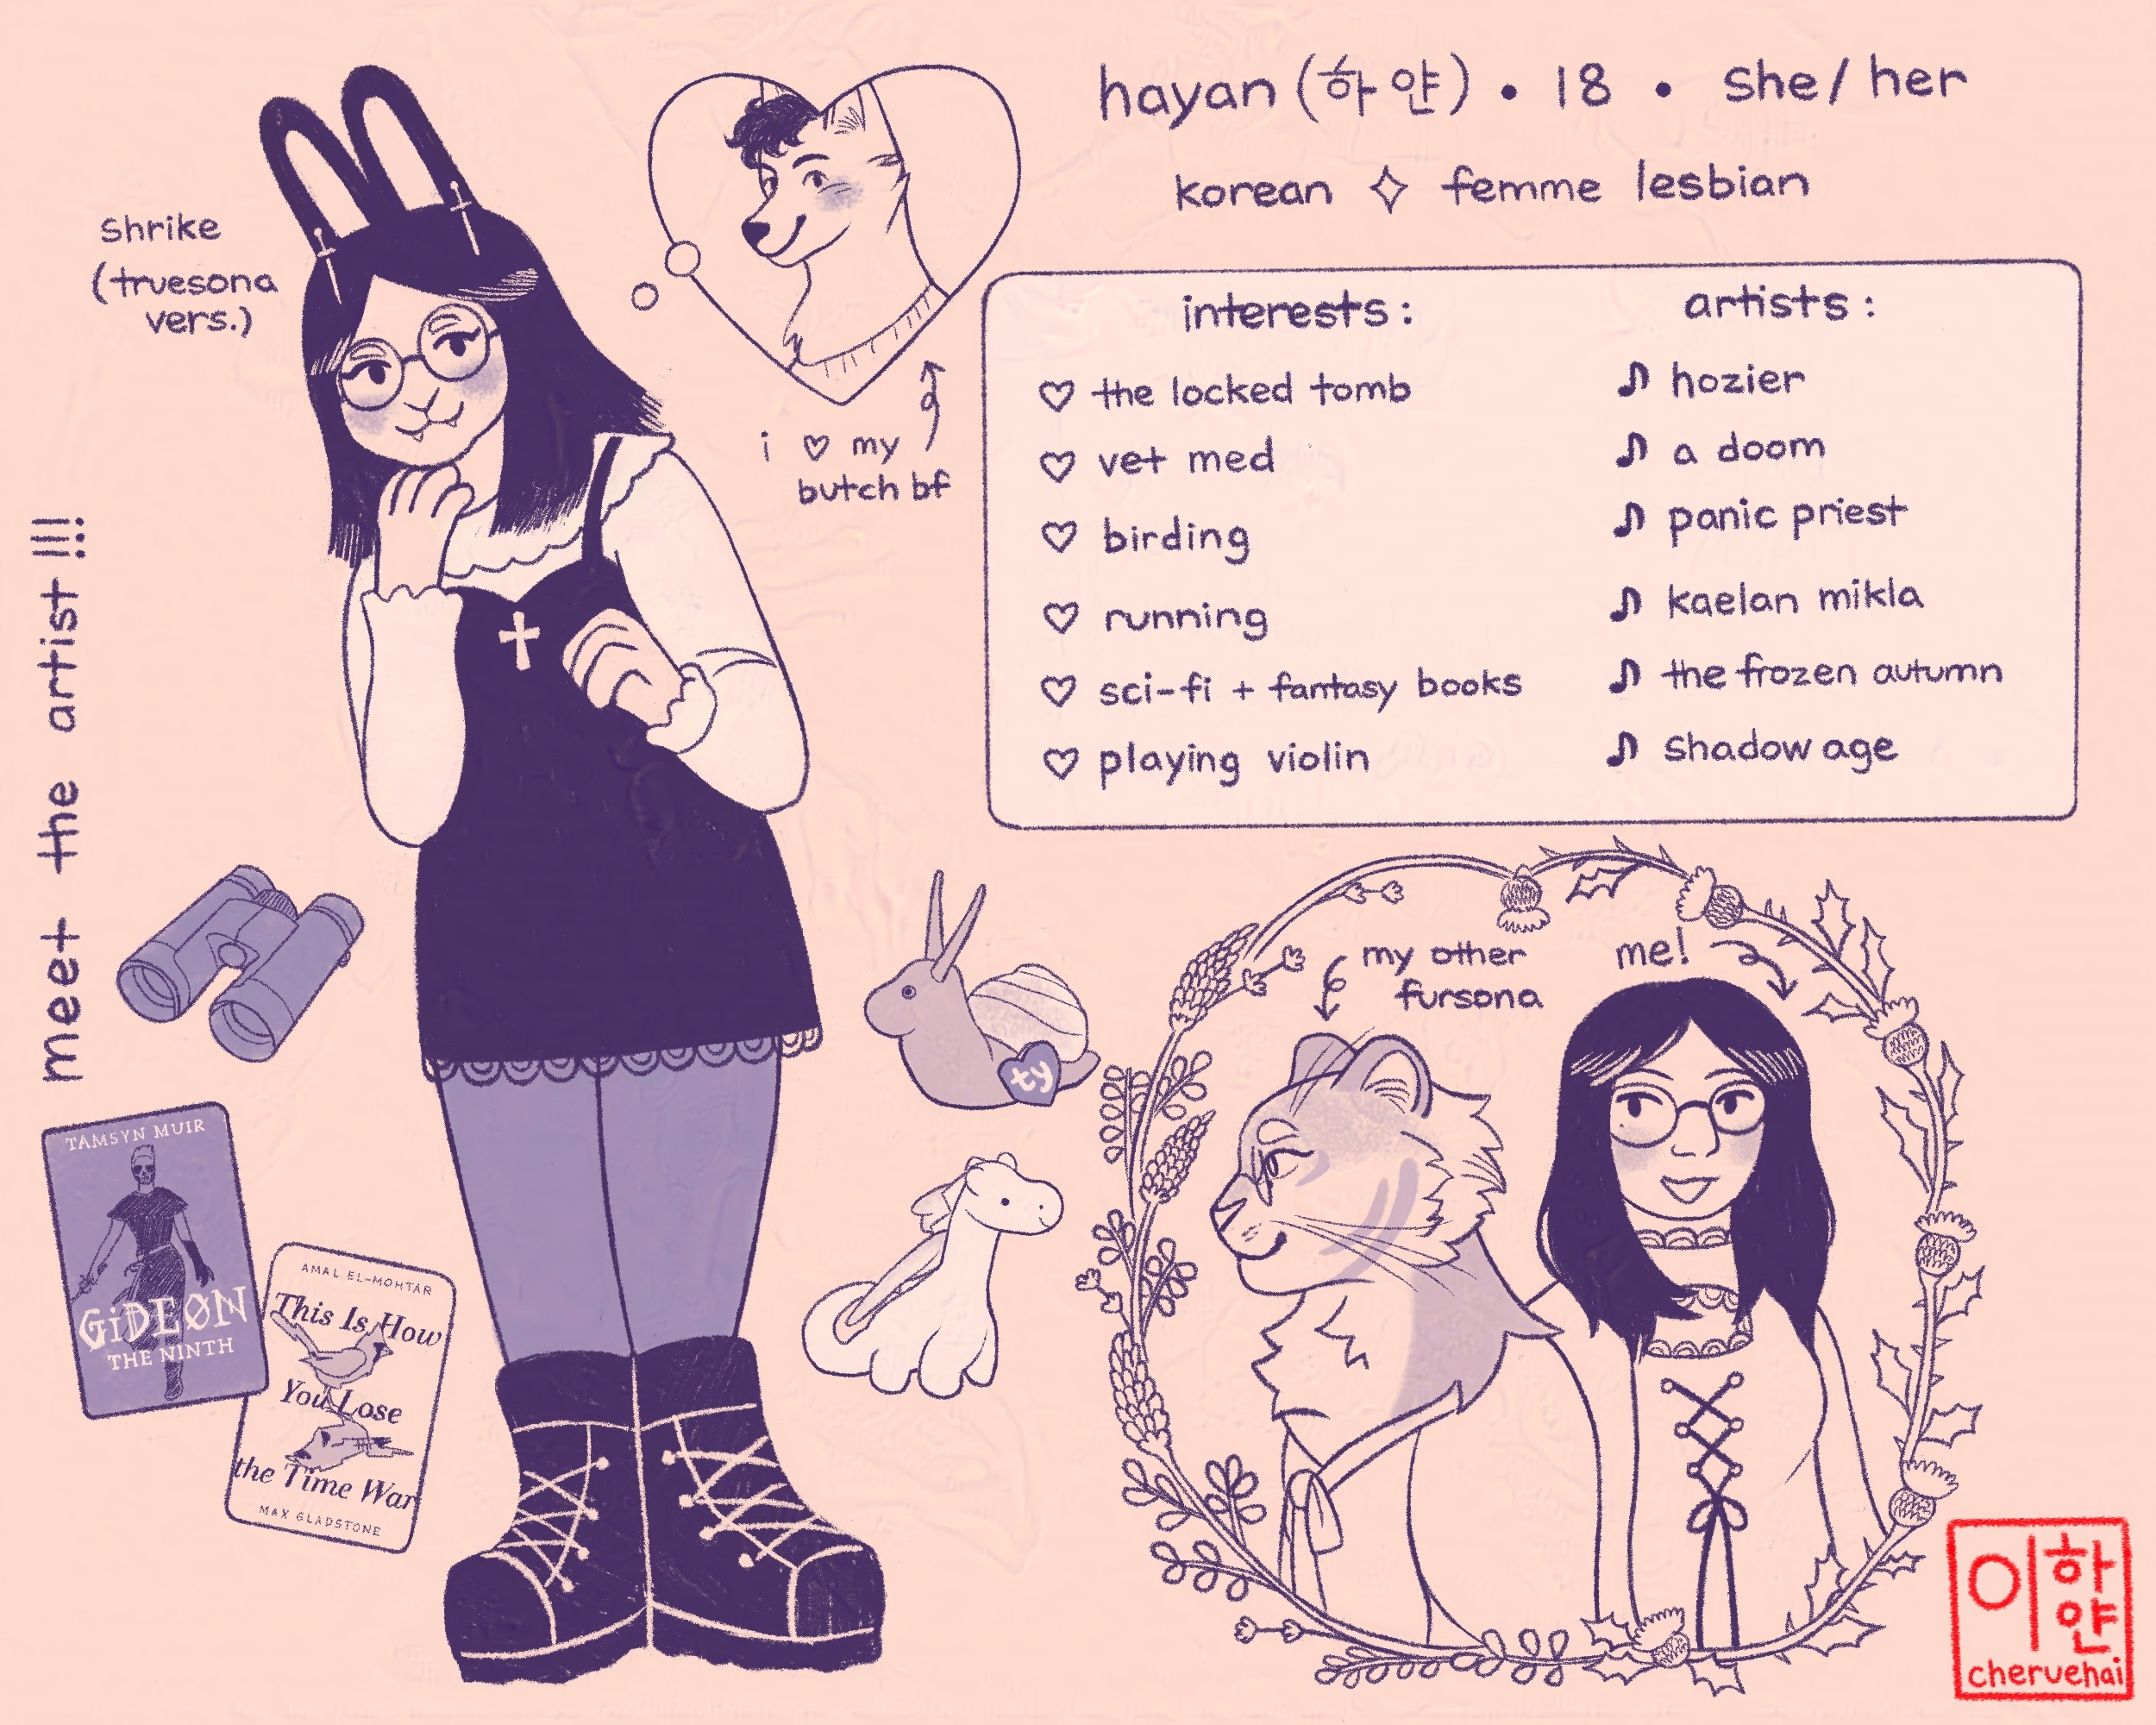 A meet the artist page featuring Hayan. The top says, “Hayan, 18, she/her," and below, “Korean, femme lesbian.” To the left is Hayan's fursona (truesona version), Shrike. She is an anthro rabbit with long dark hair and fangs. She wears glasses, a dark dress over a white shirt, tights, and lace-up boots. A heart-shaped thought bubble contains the fursona of Hayan's partner. A note reads, "i ❤️ my butch bf."

              A box to the right contains two text columns. The first is labelled "interests." It lists: “the locked tomb, vet med, birding, running, sci-fi + fantasy books, and playing violin.” The right column is titled “artists” and lists: “hozier, a doom, panic priest, kælan mikla, the frozen autumn, shadow age." Below are Hayan's other fursona, a tiger wearing glasses and hanbok, and Hayan herself. There are objects scattered around the page. There are two Beanie Babies, Swirly the snail Beanie Baby and Magic the dragon. There are also binoculars and the books Gideon the Ninth and This is How You Lose the Time War.